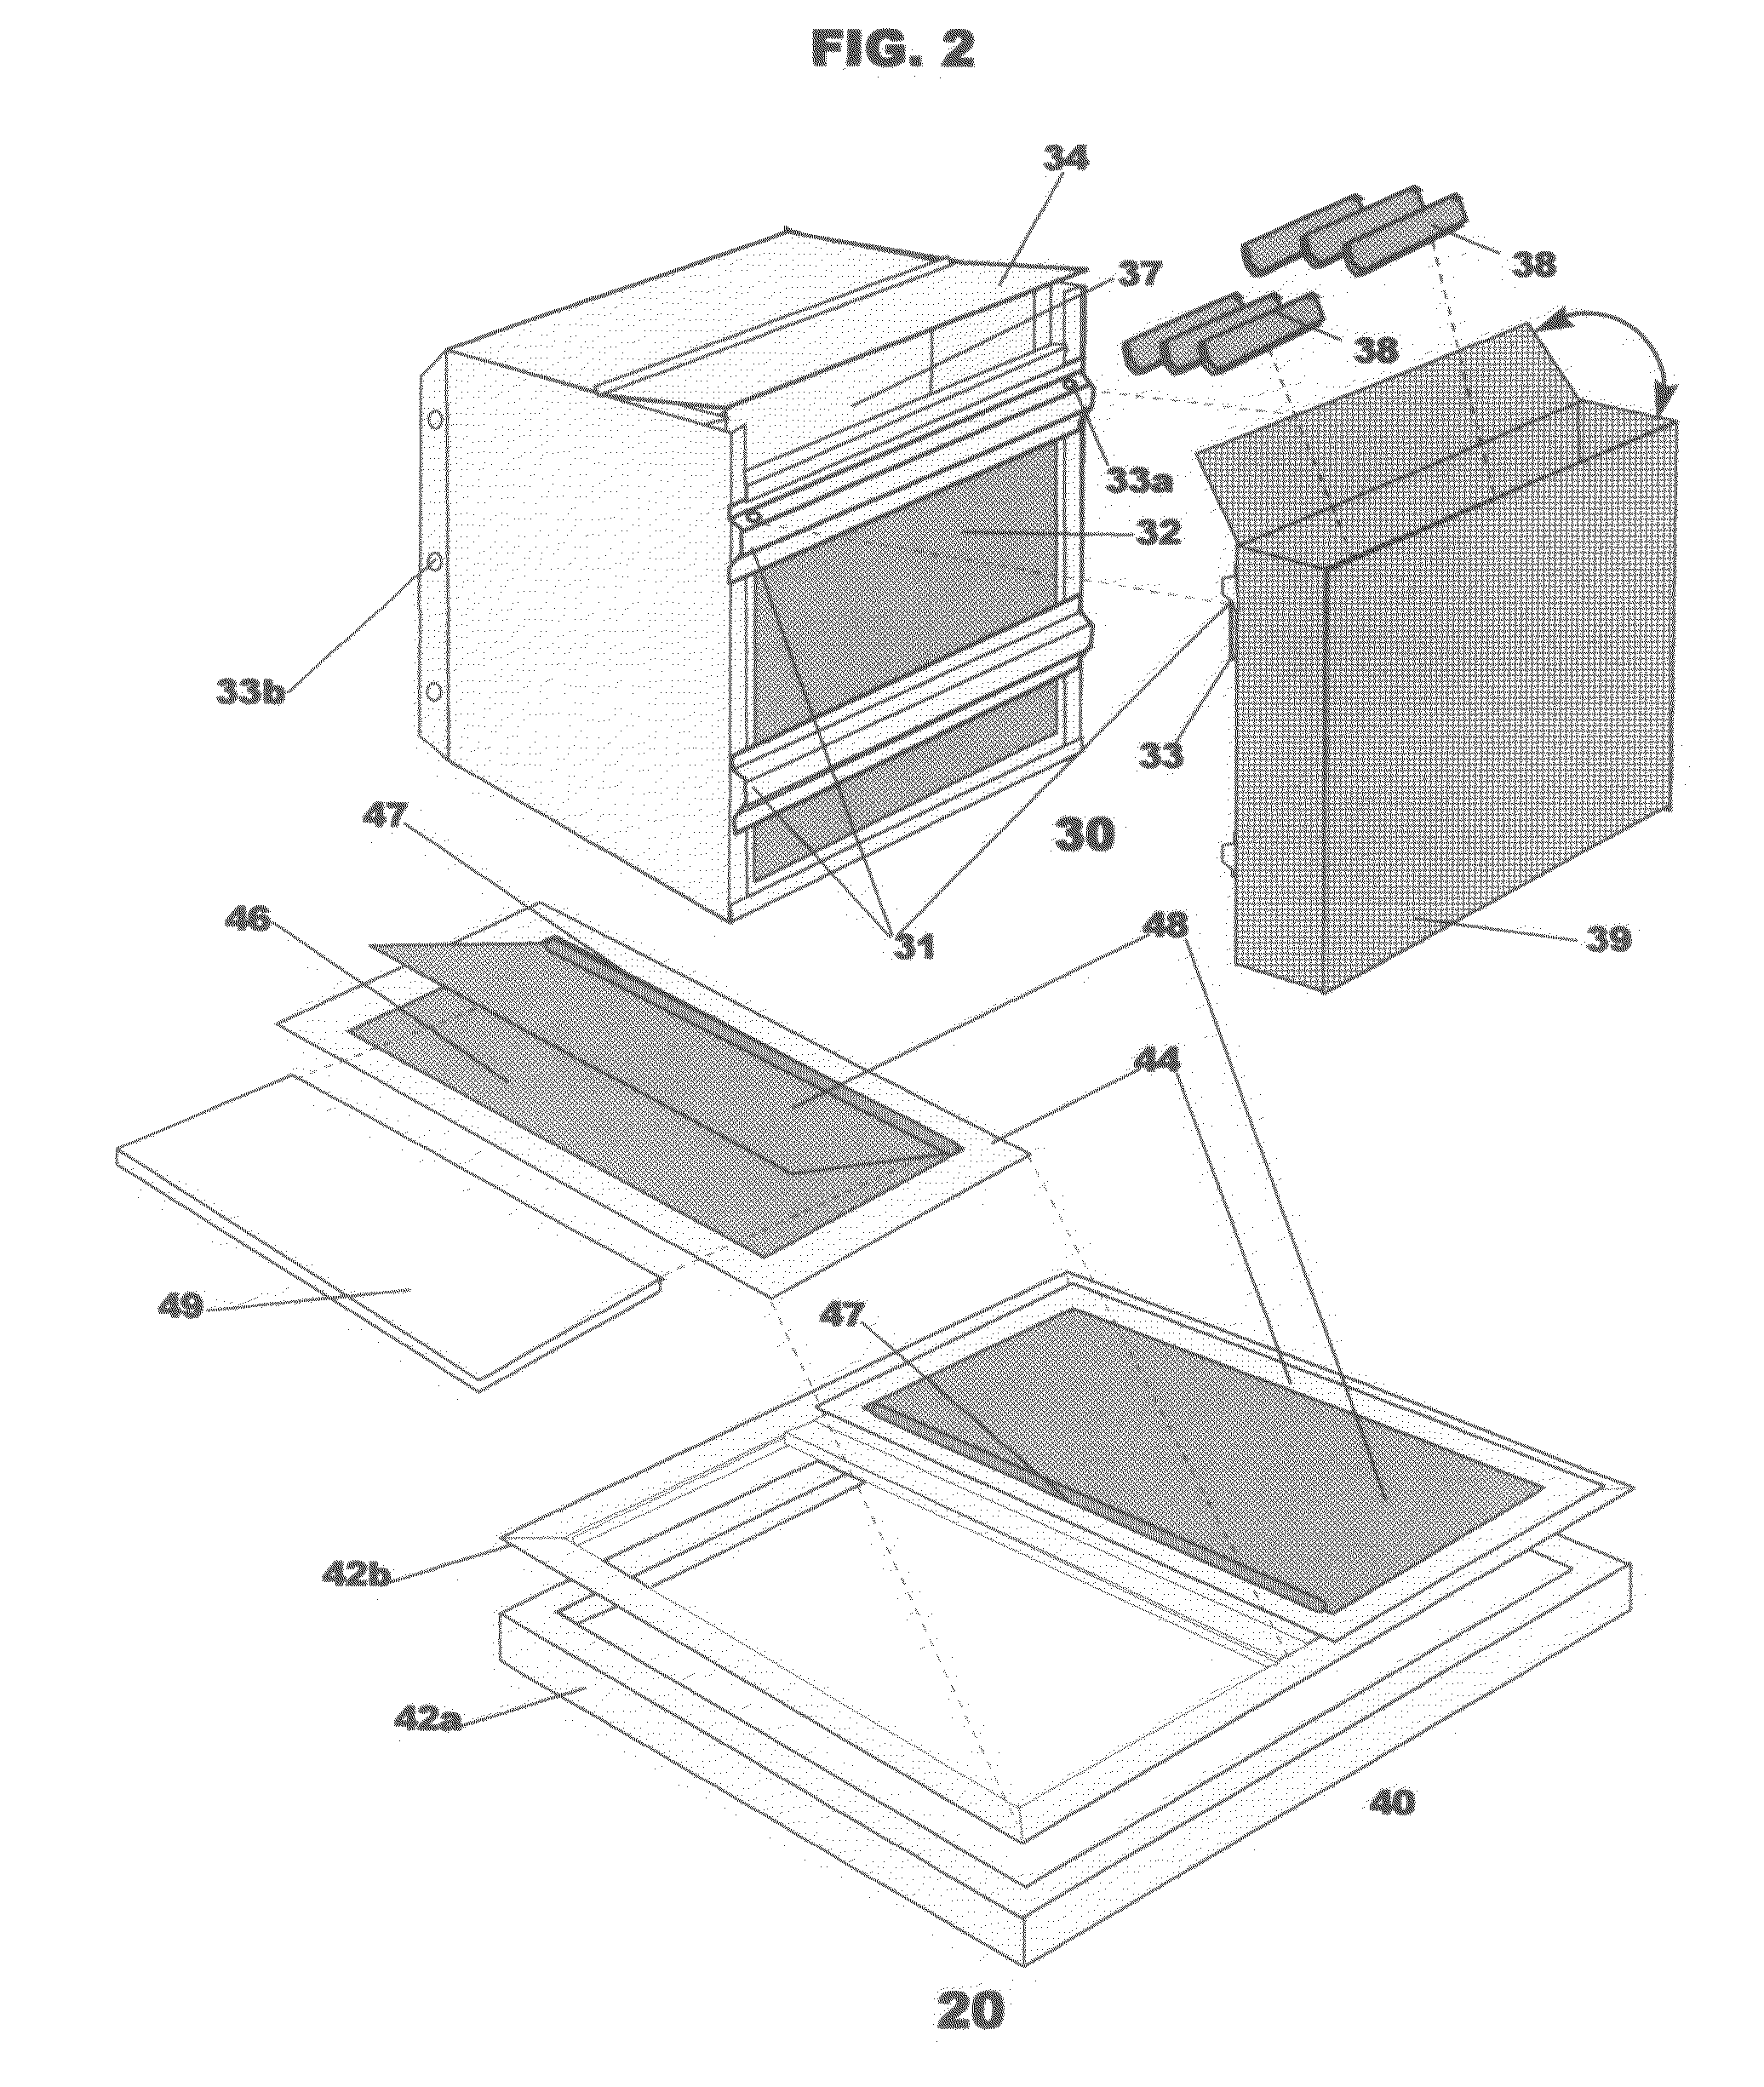 Watershed runoff treatment device & method